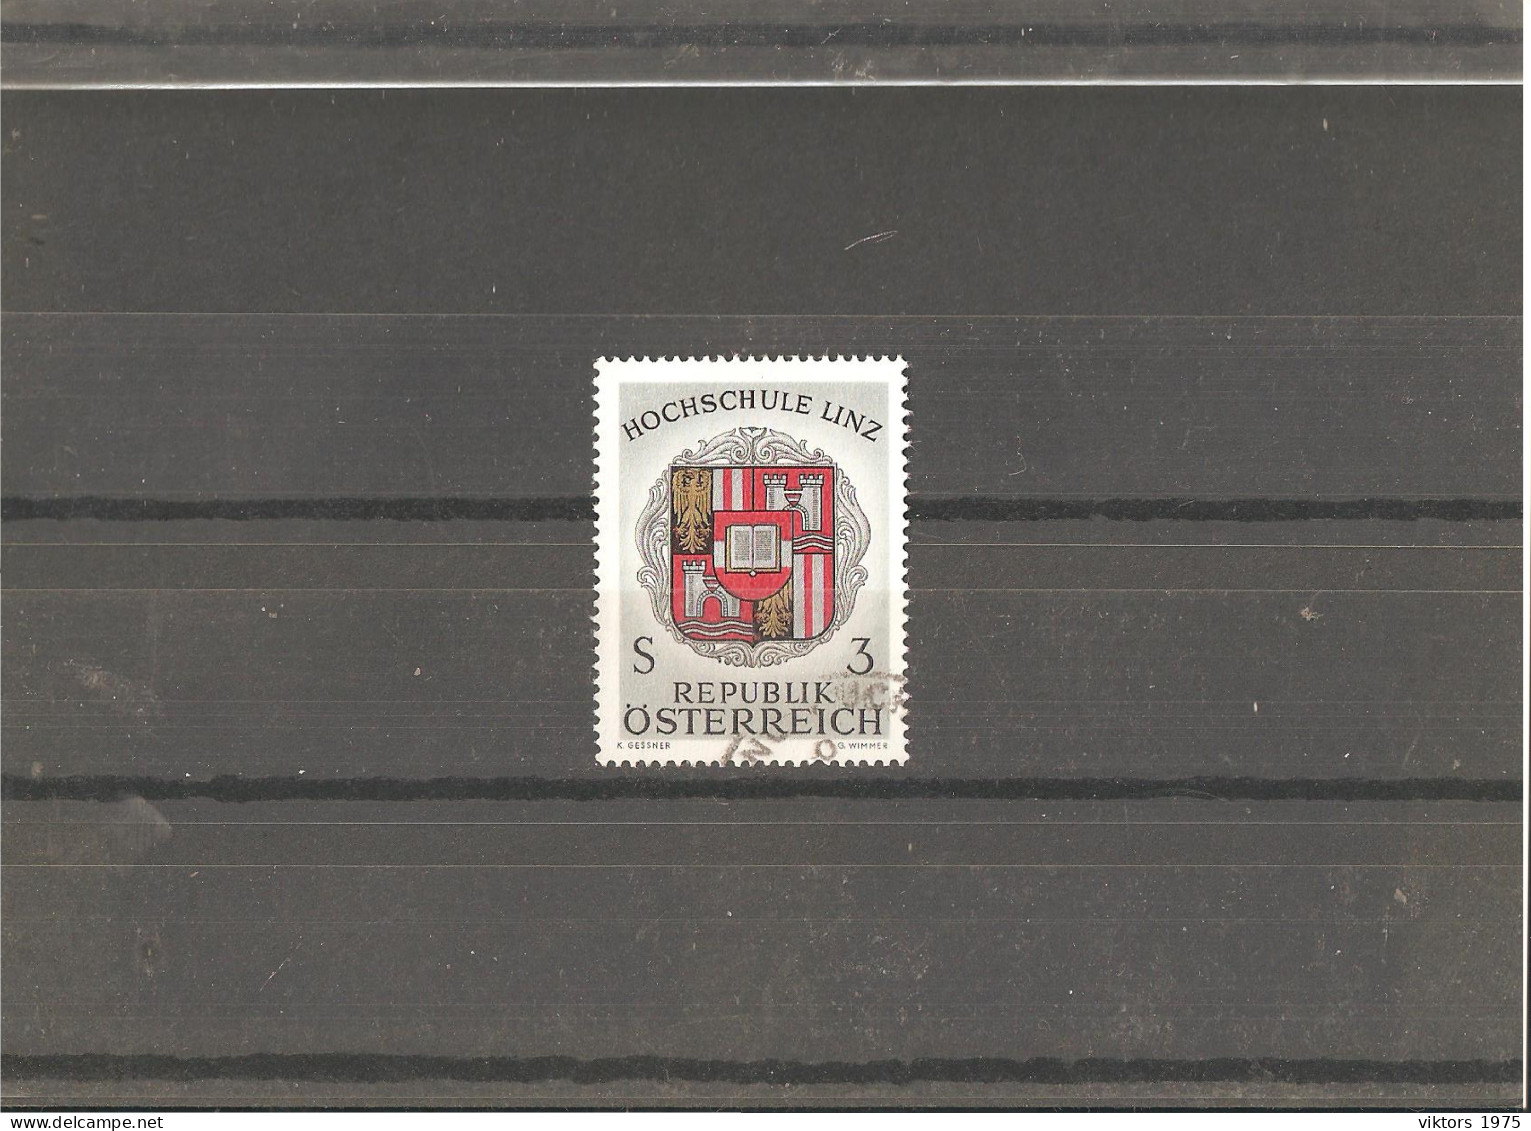 Used Stamp Nr.1230 In MICHEL Catalog - Used Stamps